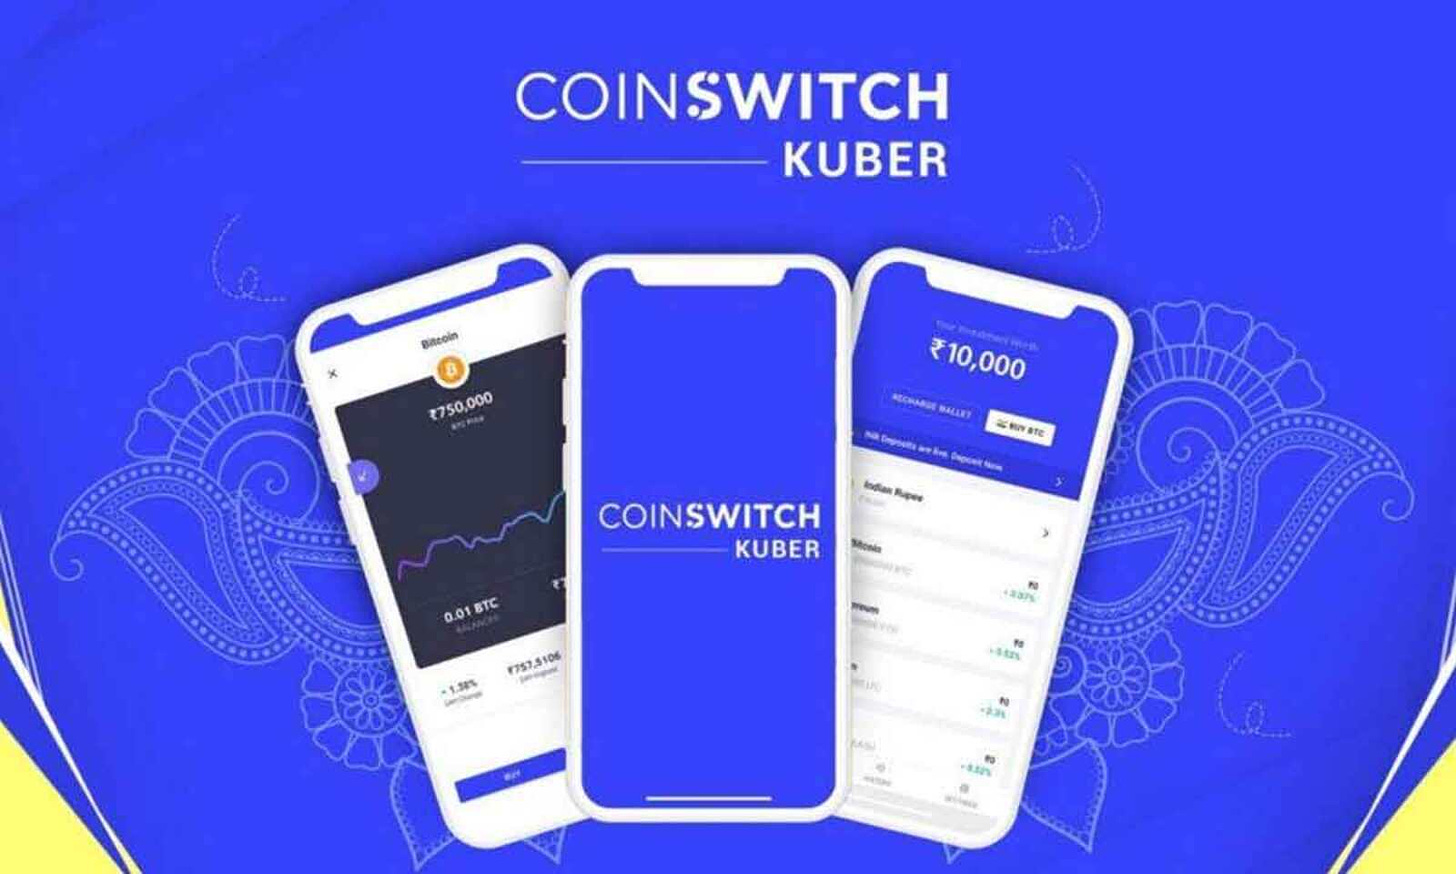 CoinSwitch Kuber temporarily disables rupee deposits